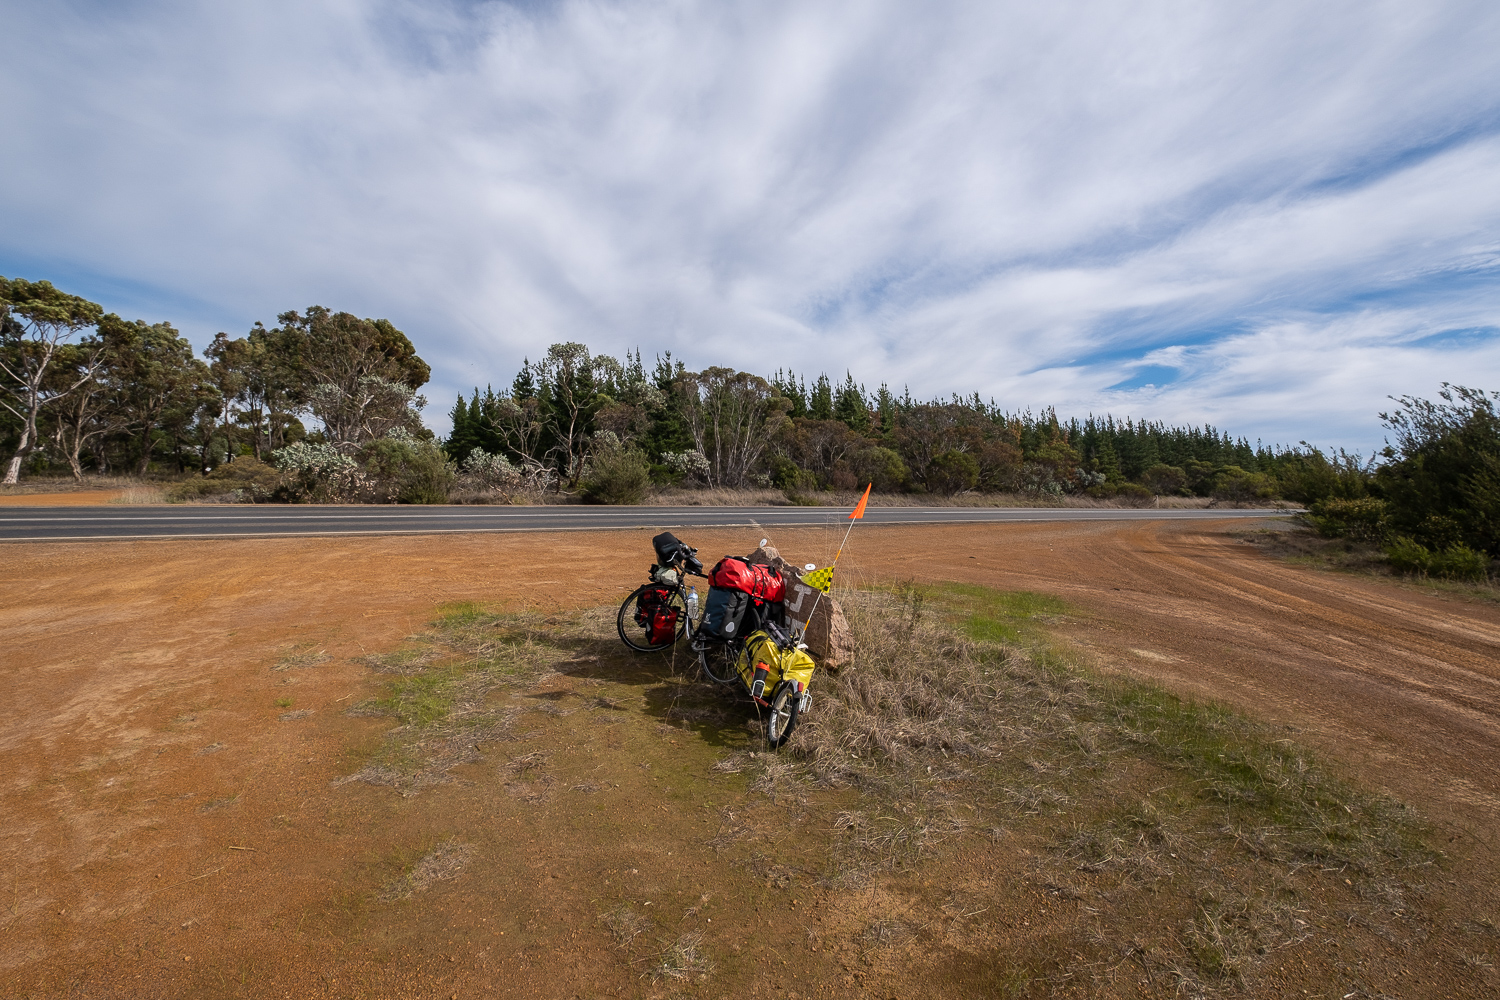  When I set off on my journey from Esperance to Norseman, I was looking forward to the adventure of it all. I had heard that the off-road trail from Esperance to Balladonia was thrilling, and I was determined to take it. However, after speaking with 